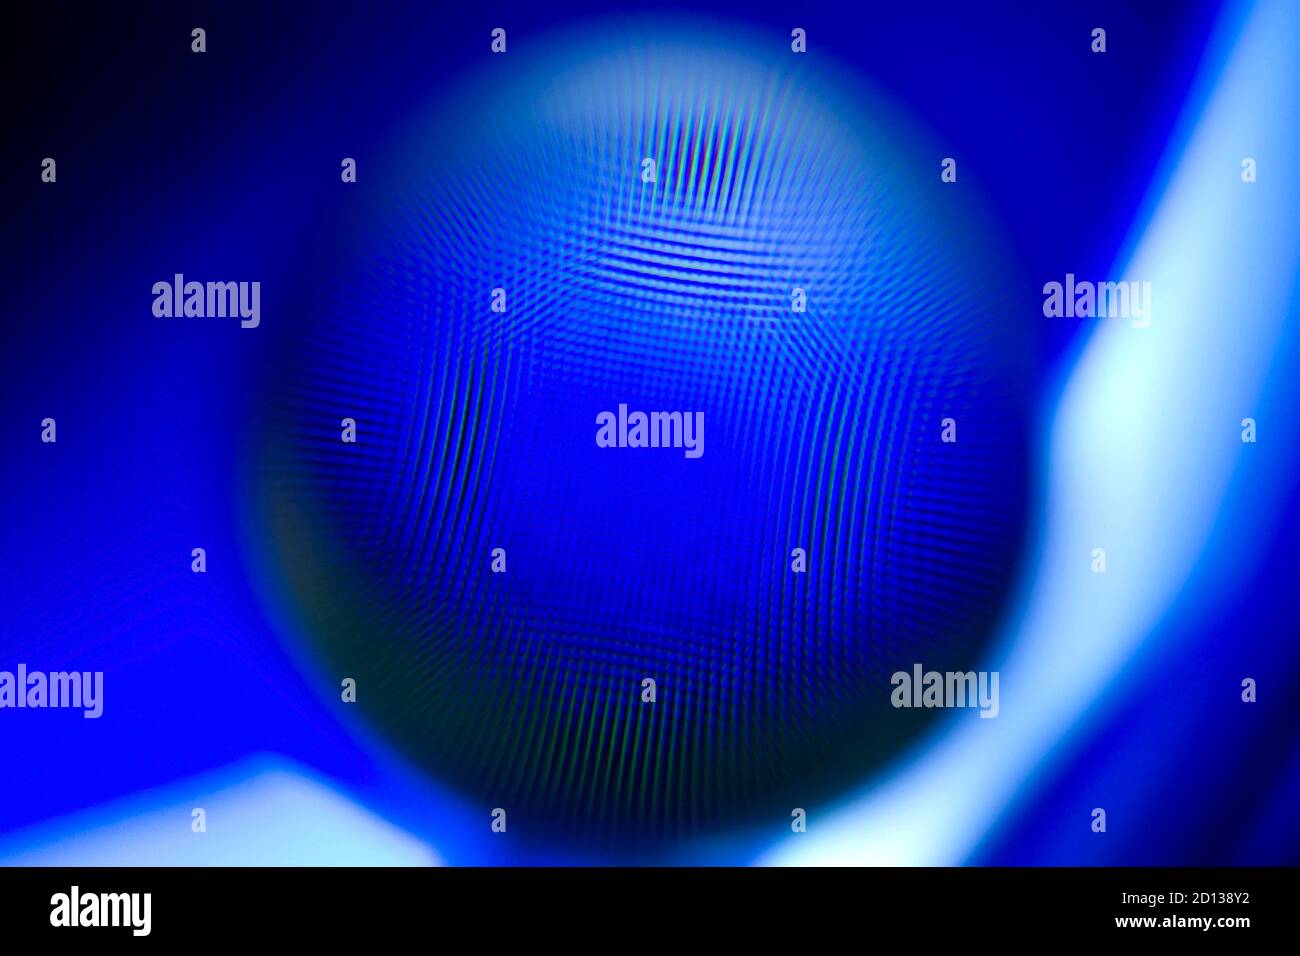 Abstract blurry background with seamless objects. Abstract objects in blur. Stock Photo